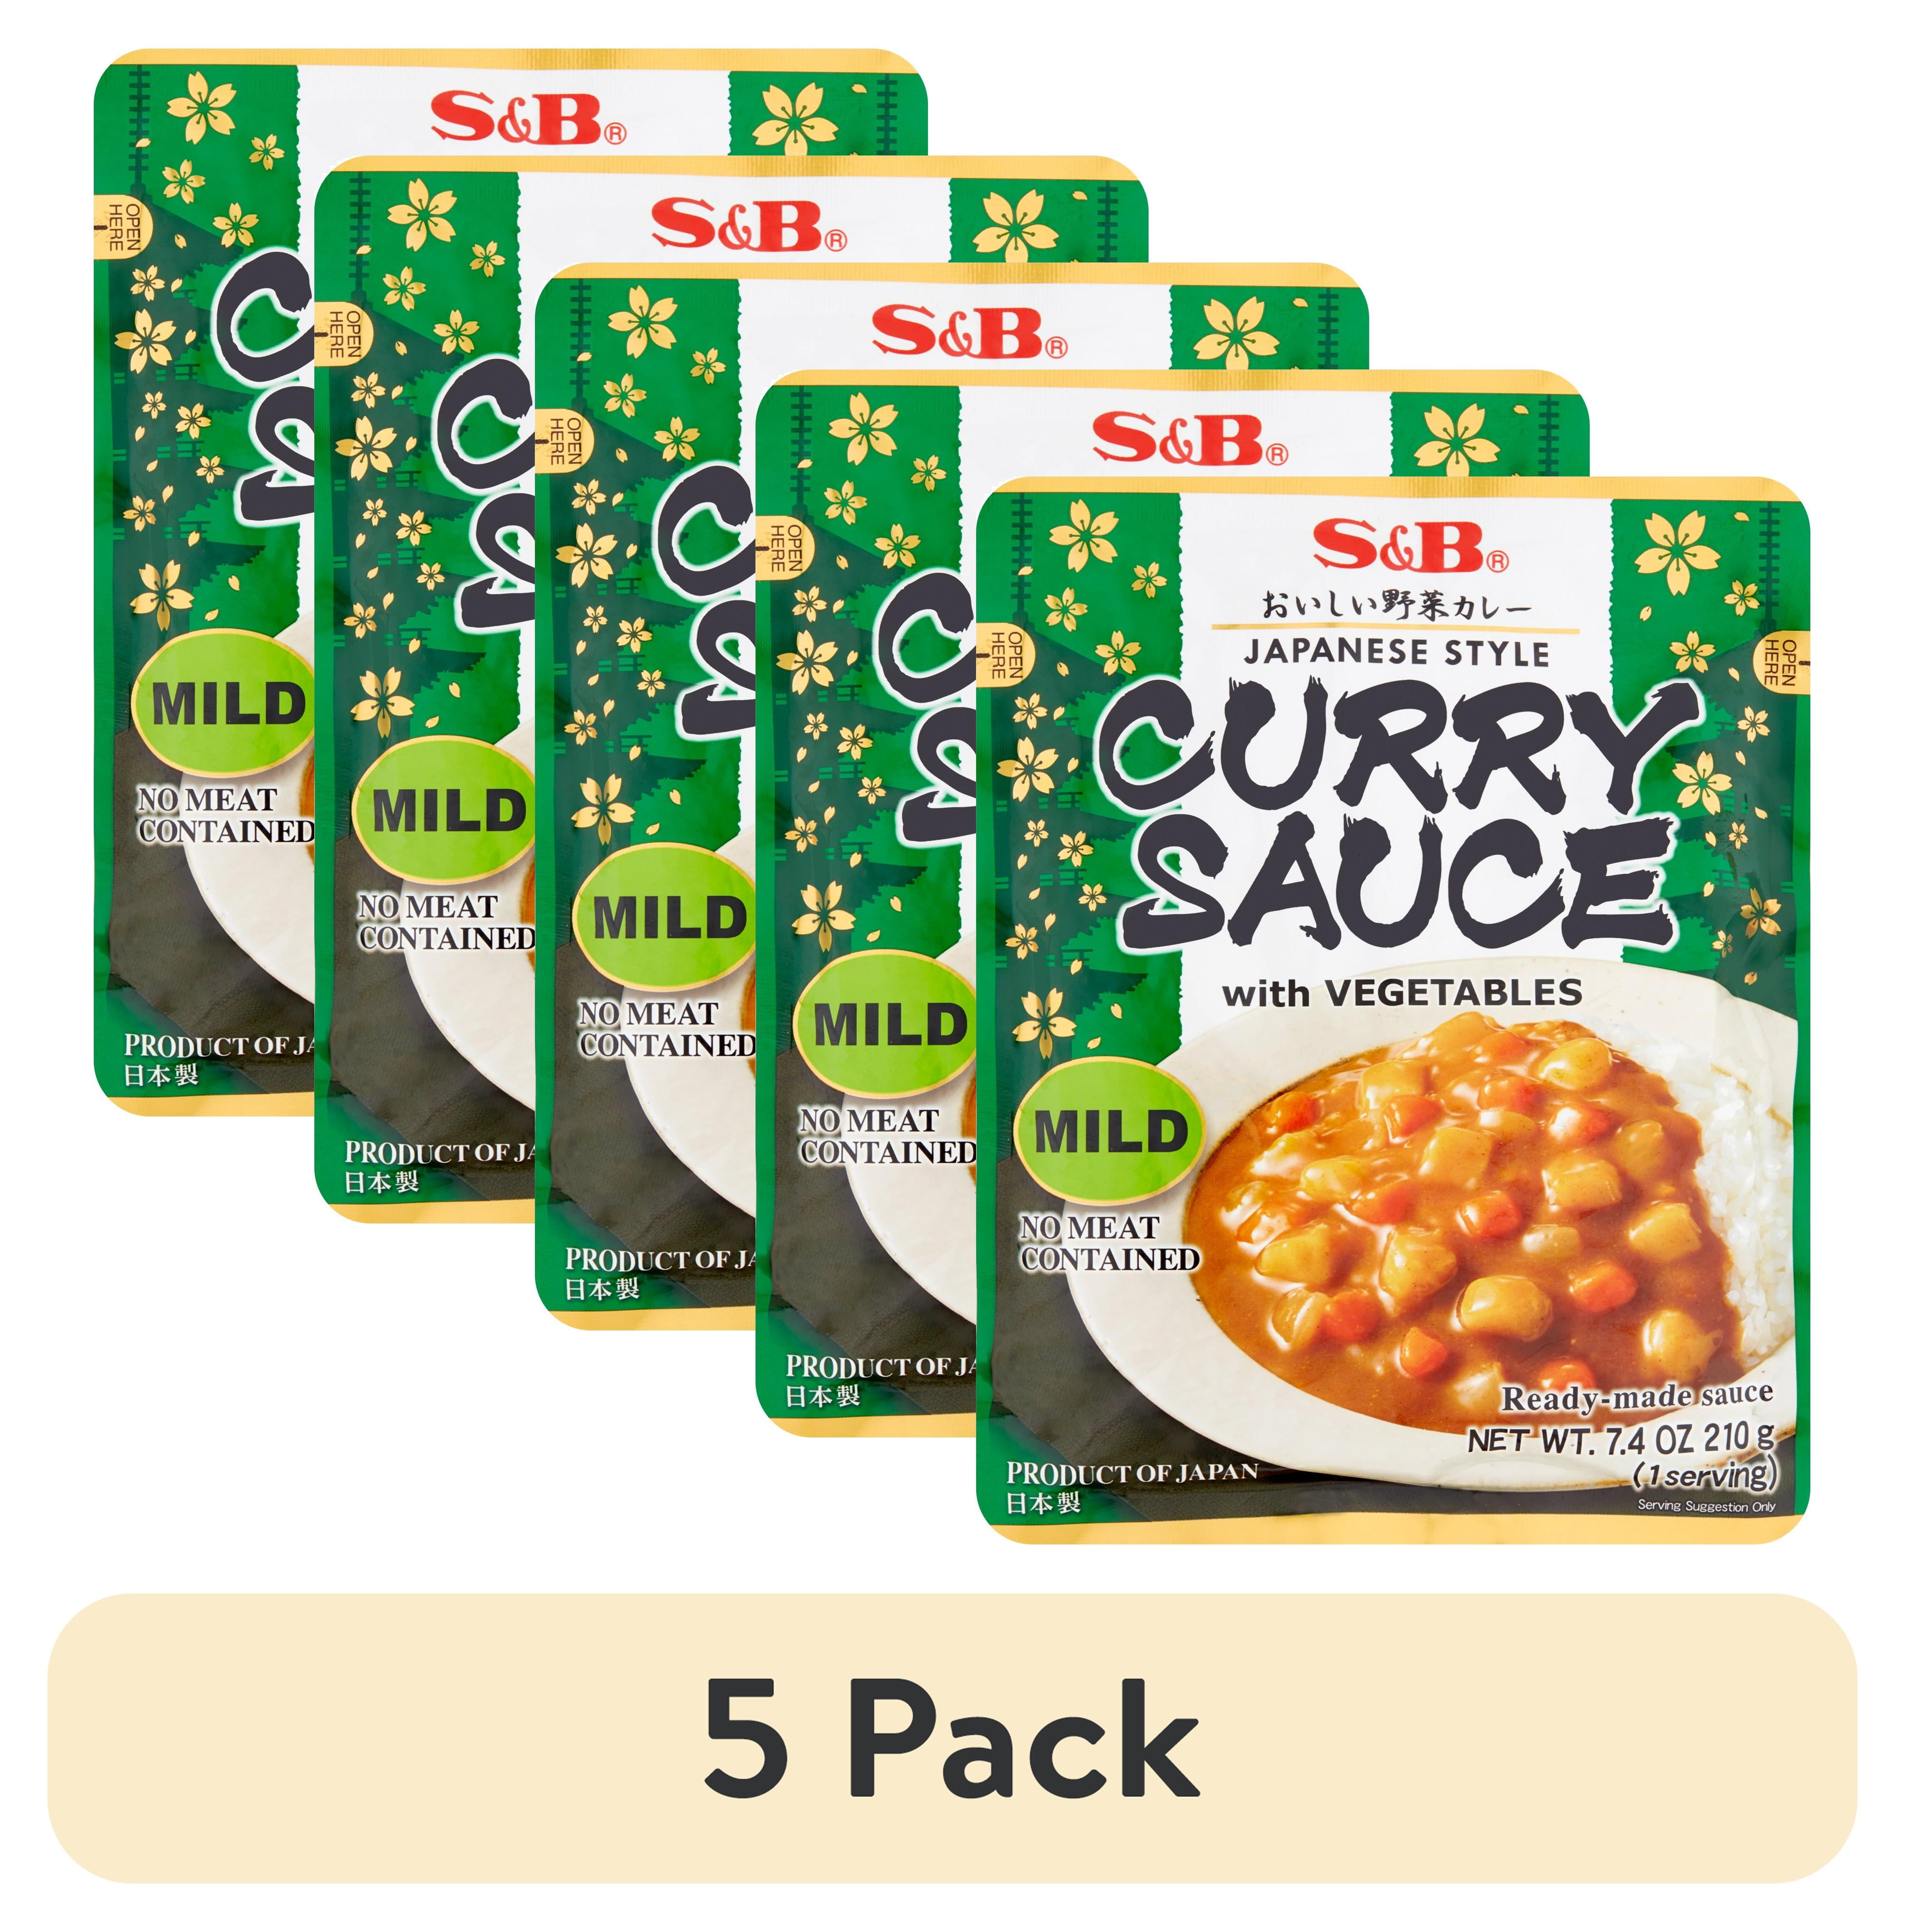 5 pack) S&B Style RETORT, Japanese with Curry 7.4 Vegetables, Sauce Mil Oz